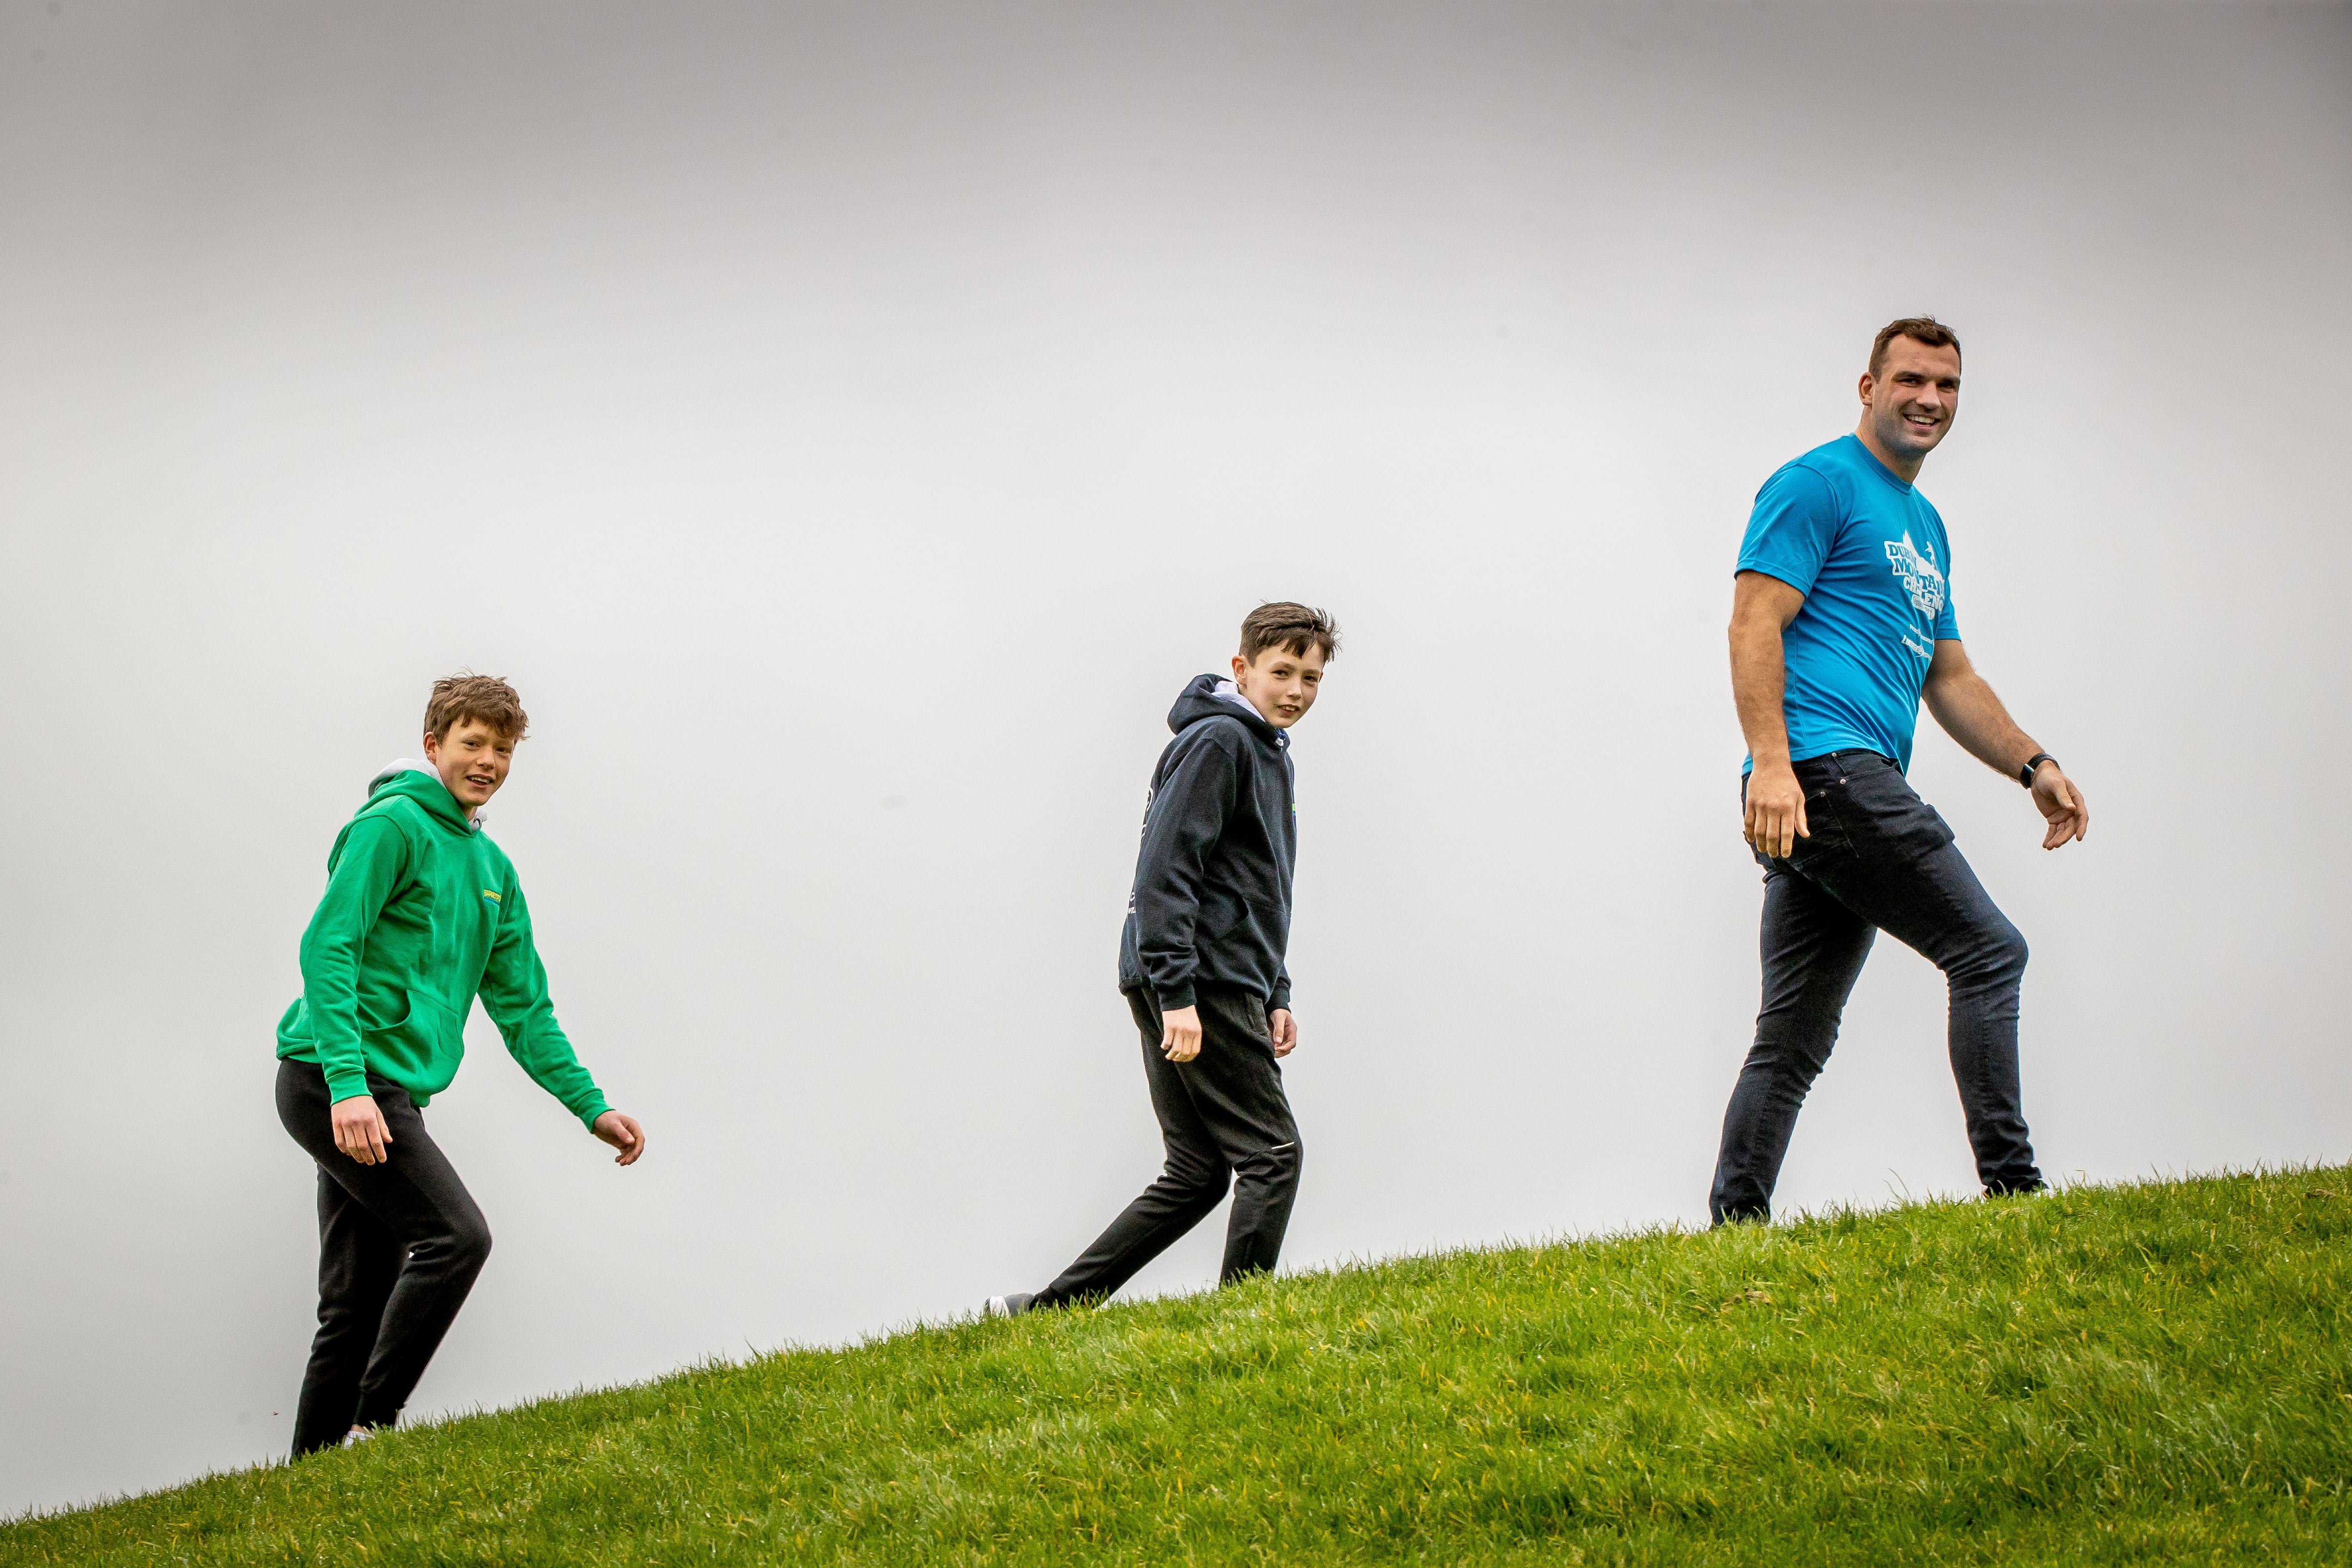 Irish 20Rugby 20star 20Tadhg 20Beirne 20calls 20on 20walkers 20and 20hikers 20across 20Ireland 20to 20join 20the 20Barretstown 20Dublin 20Mountains 20Challenge1.jpg